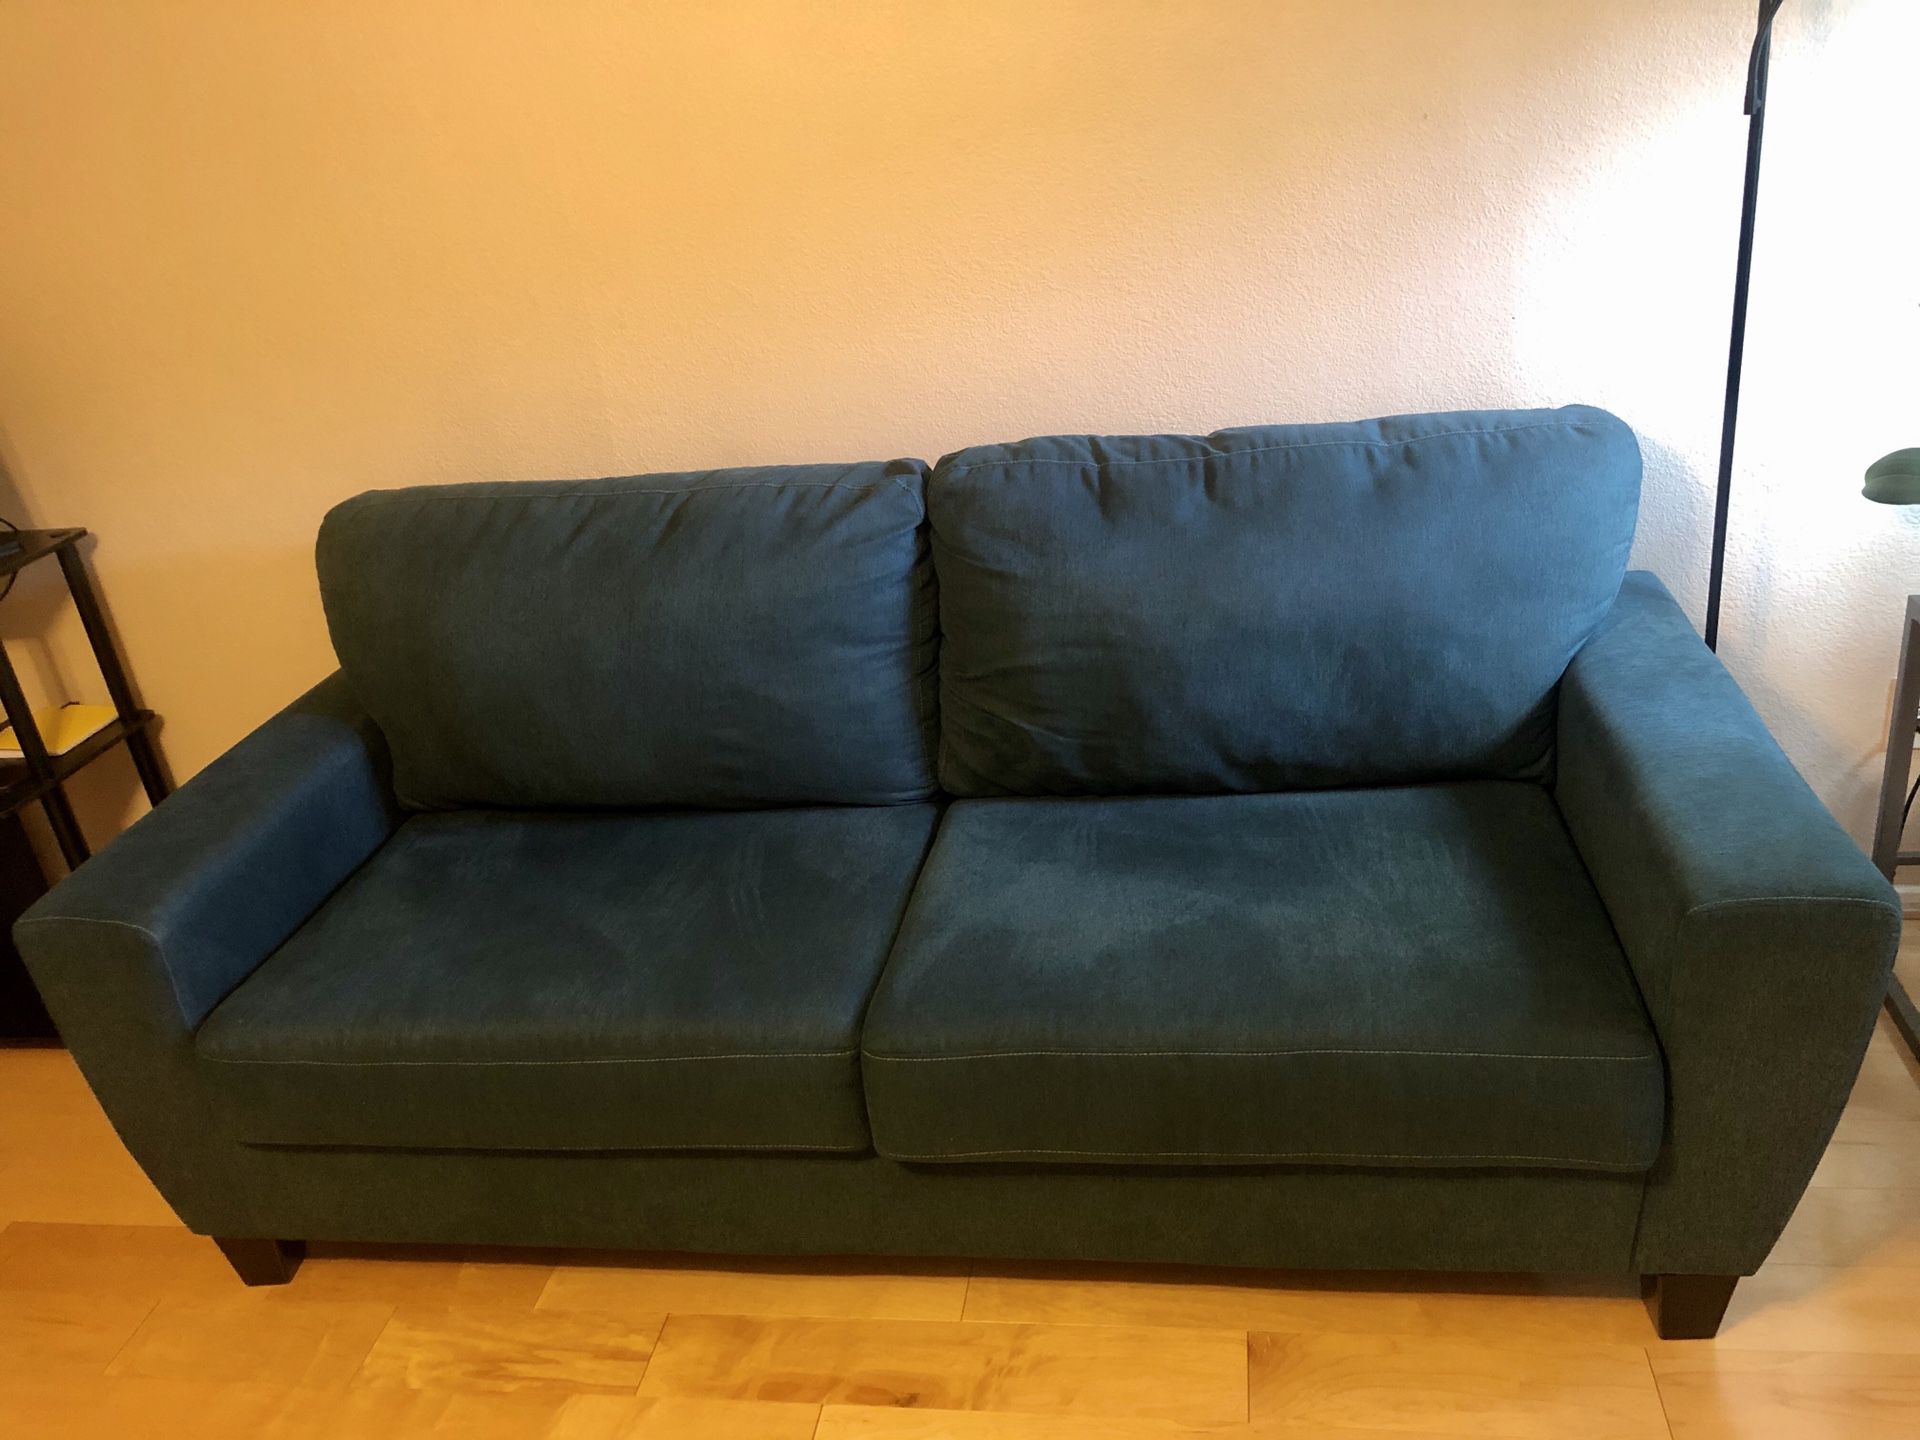 Ashley couch, in a great condition. Super comfortable. Gently used. Lively color.